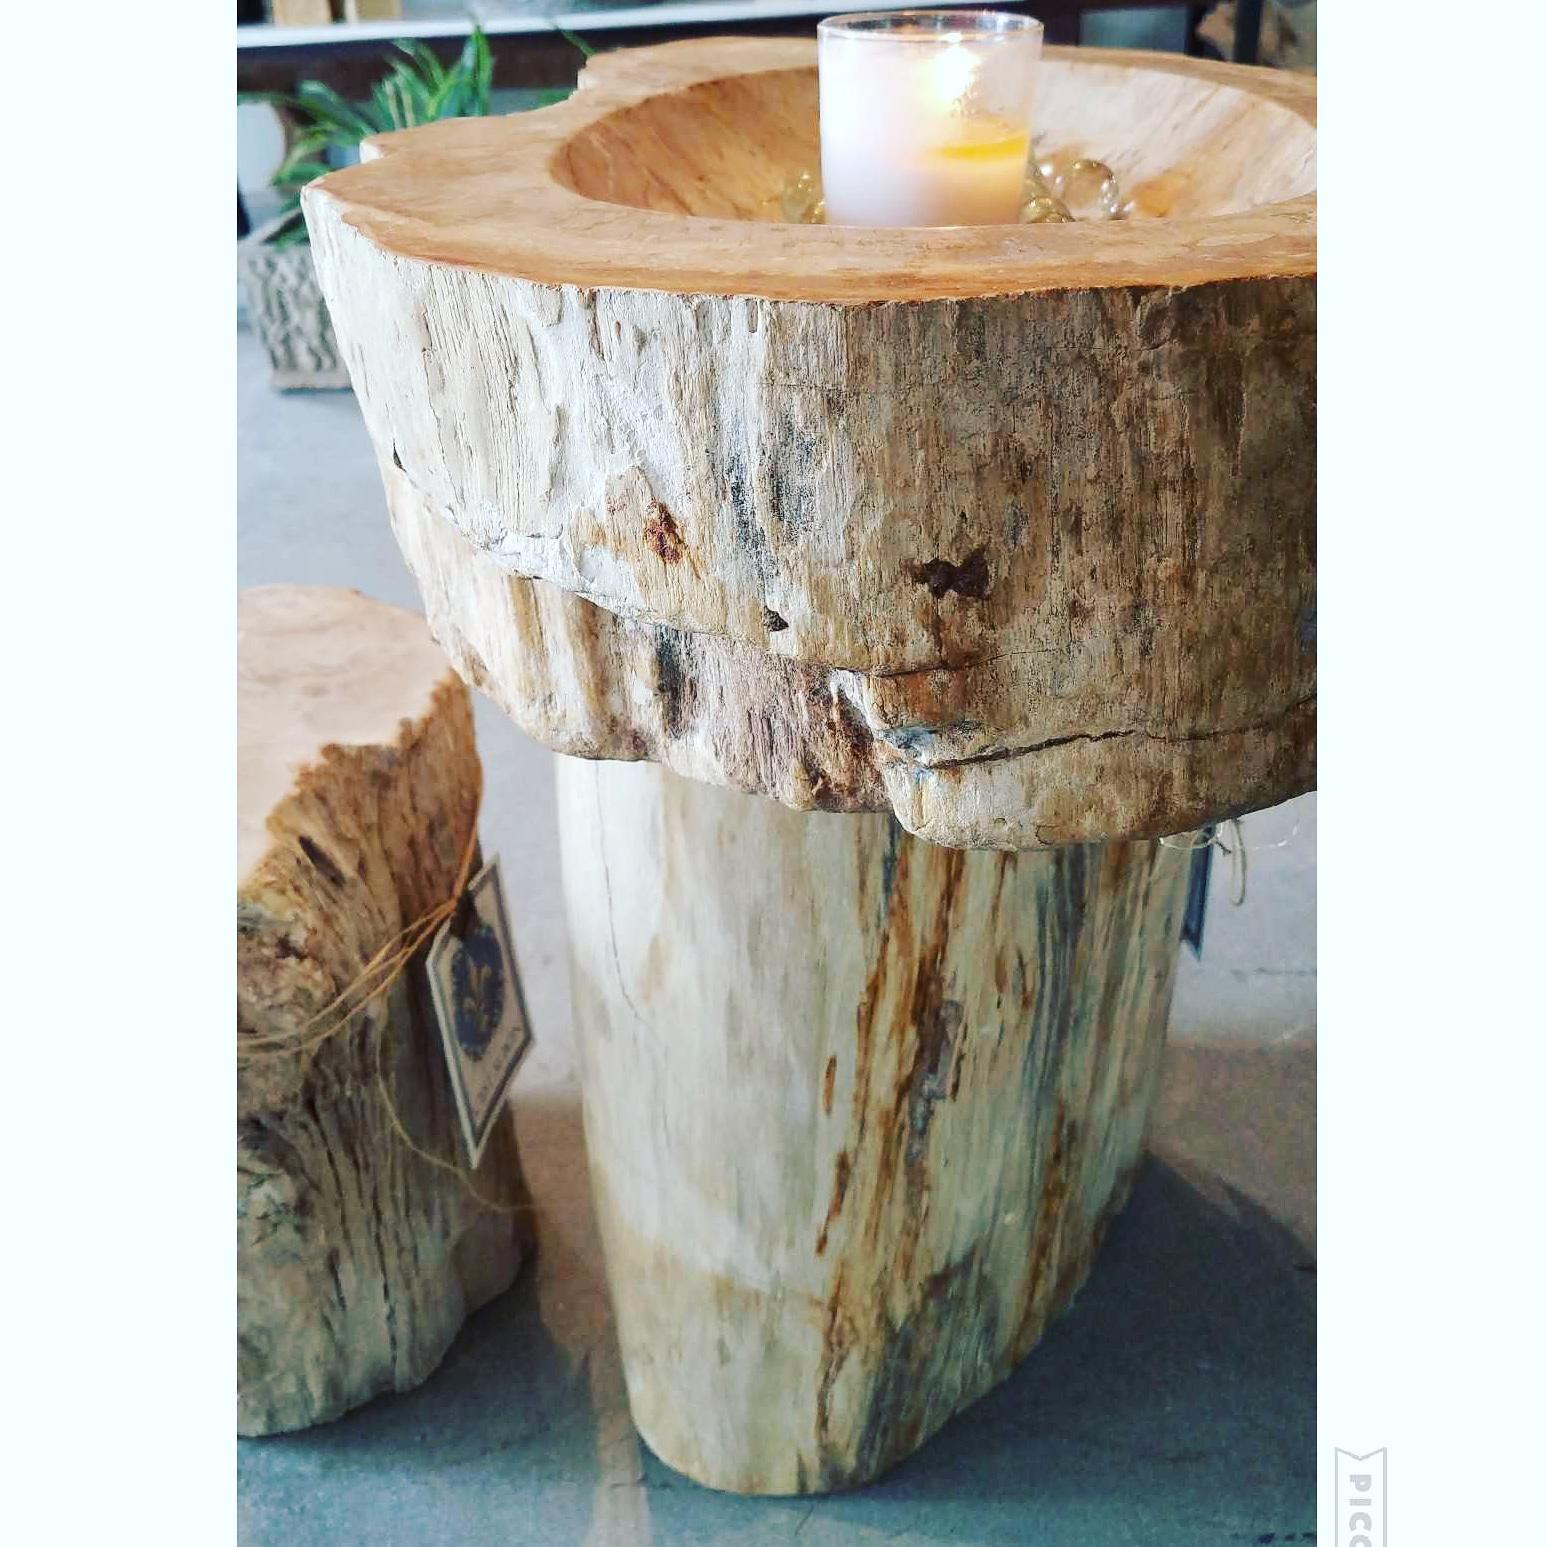 Beautiful amber toned petrified wood basin and pedestal are two separate pieces and could make a beautiful powder room sink. Wonderful pattern on the basin and the pedestal has beautiful striation markings and is a bit lighter in tone. Together the